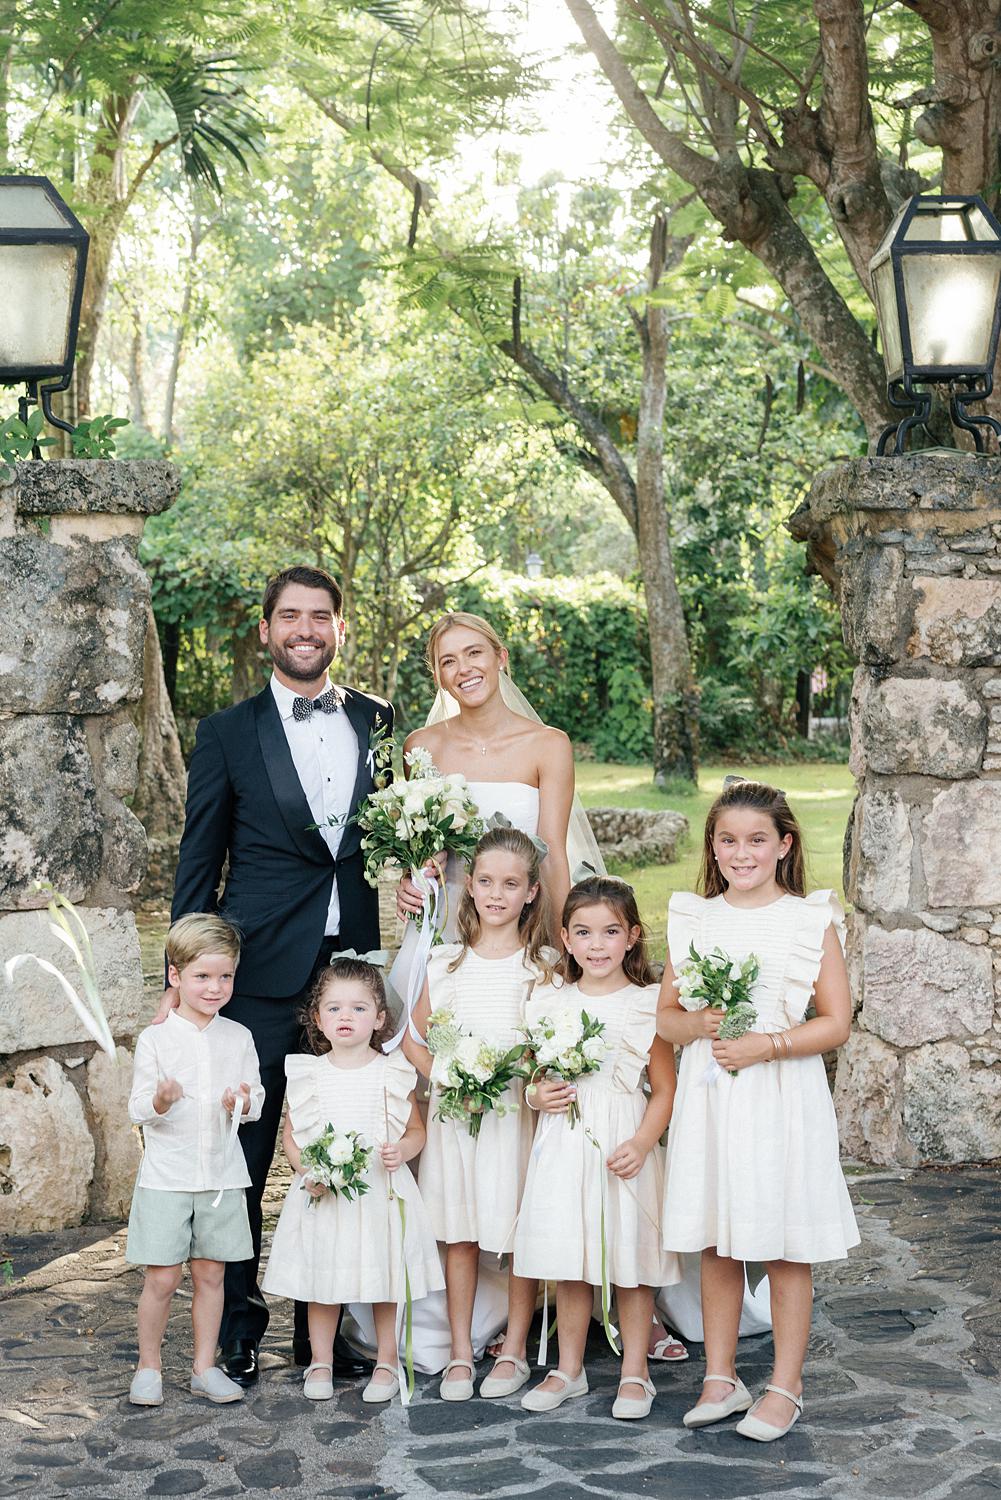 Bride and groom with flower girls and ring bearer at Altos de Chavón wedding.